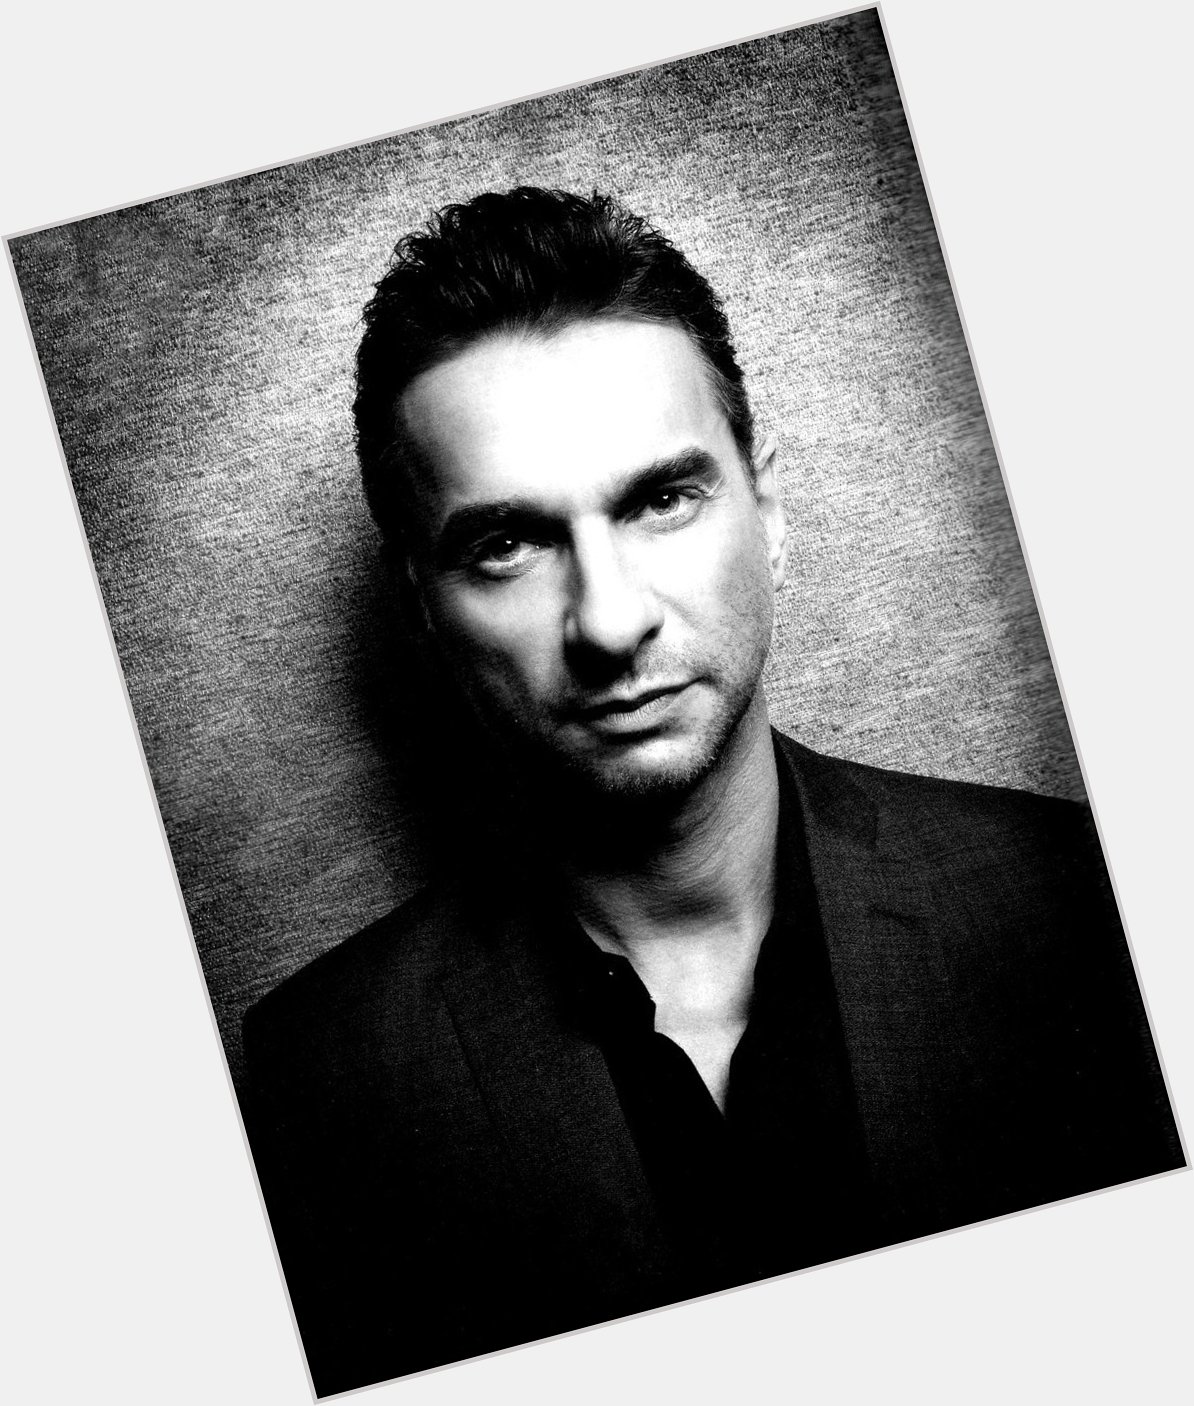  Happy 55th singer and frontman Dave Gahan        